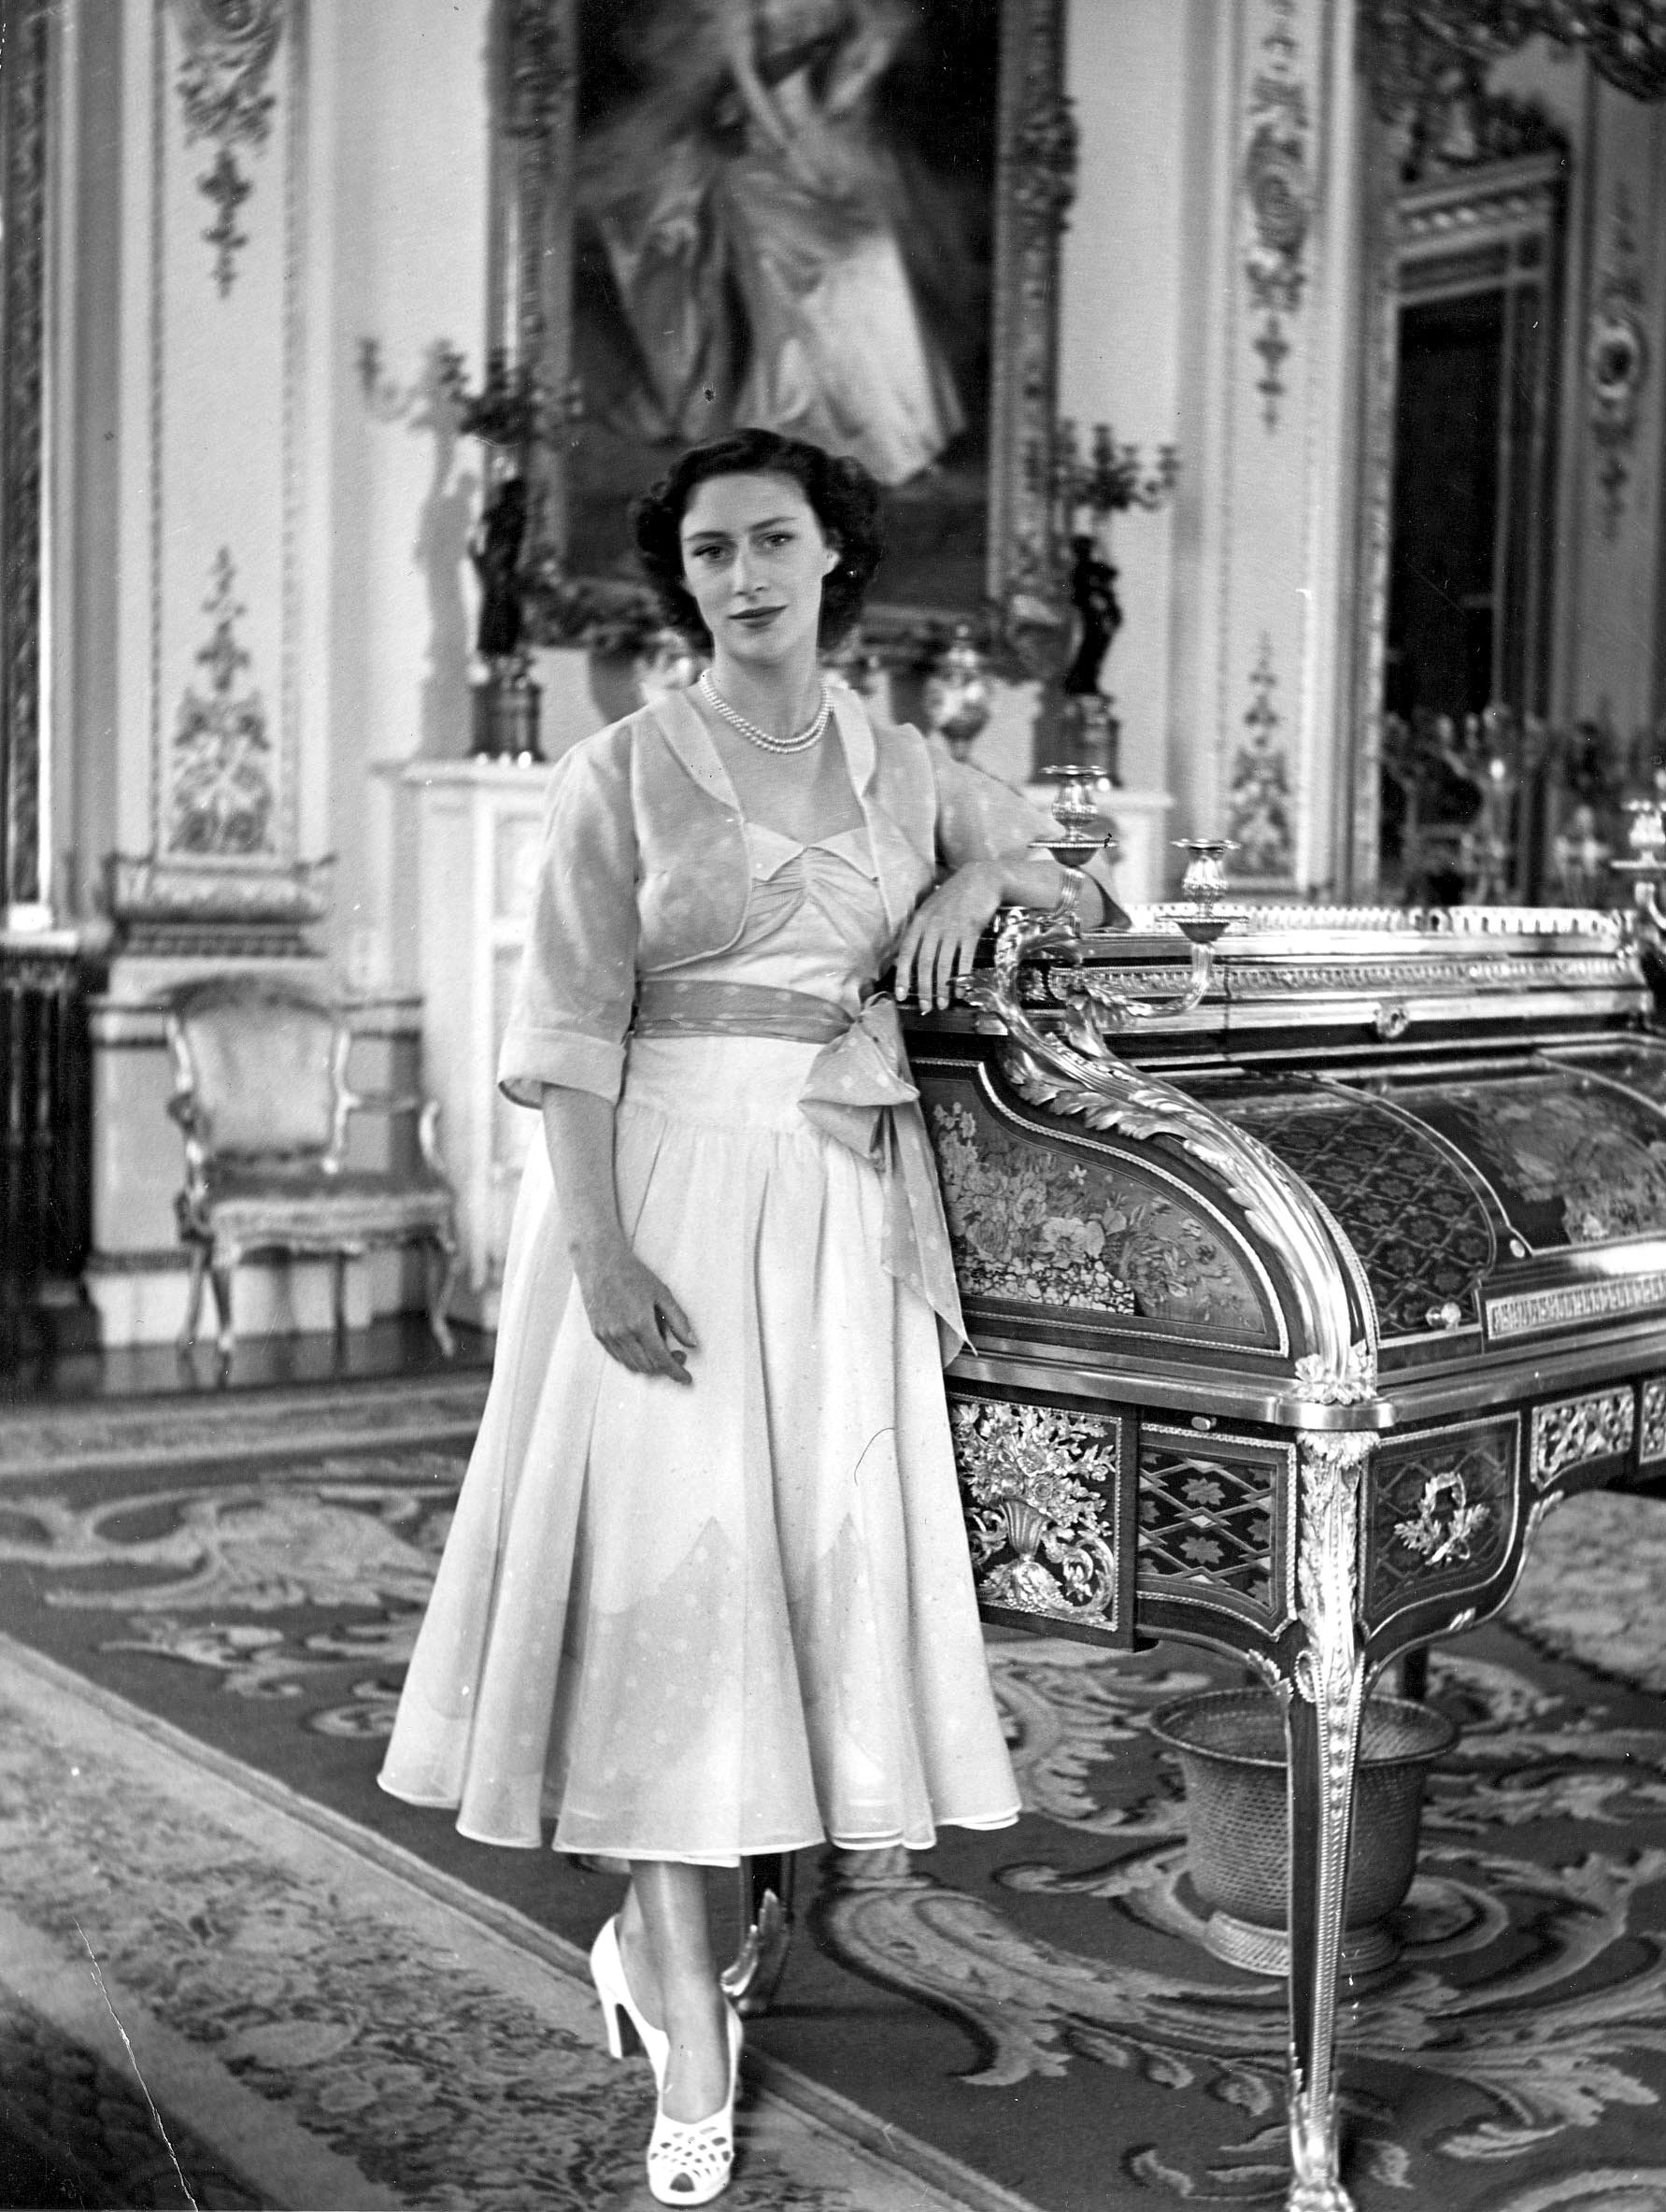 <p>Shortly before the death of her father and accession of her sister, Princess Margaret posed for a 21st birthday portrait inside Glamis Castle in Scotland in 1951. Glamis is the childhood home of her mother, Queen Elizabeth the Queen Mother, and is where Margaret was born in 1930.</p>